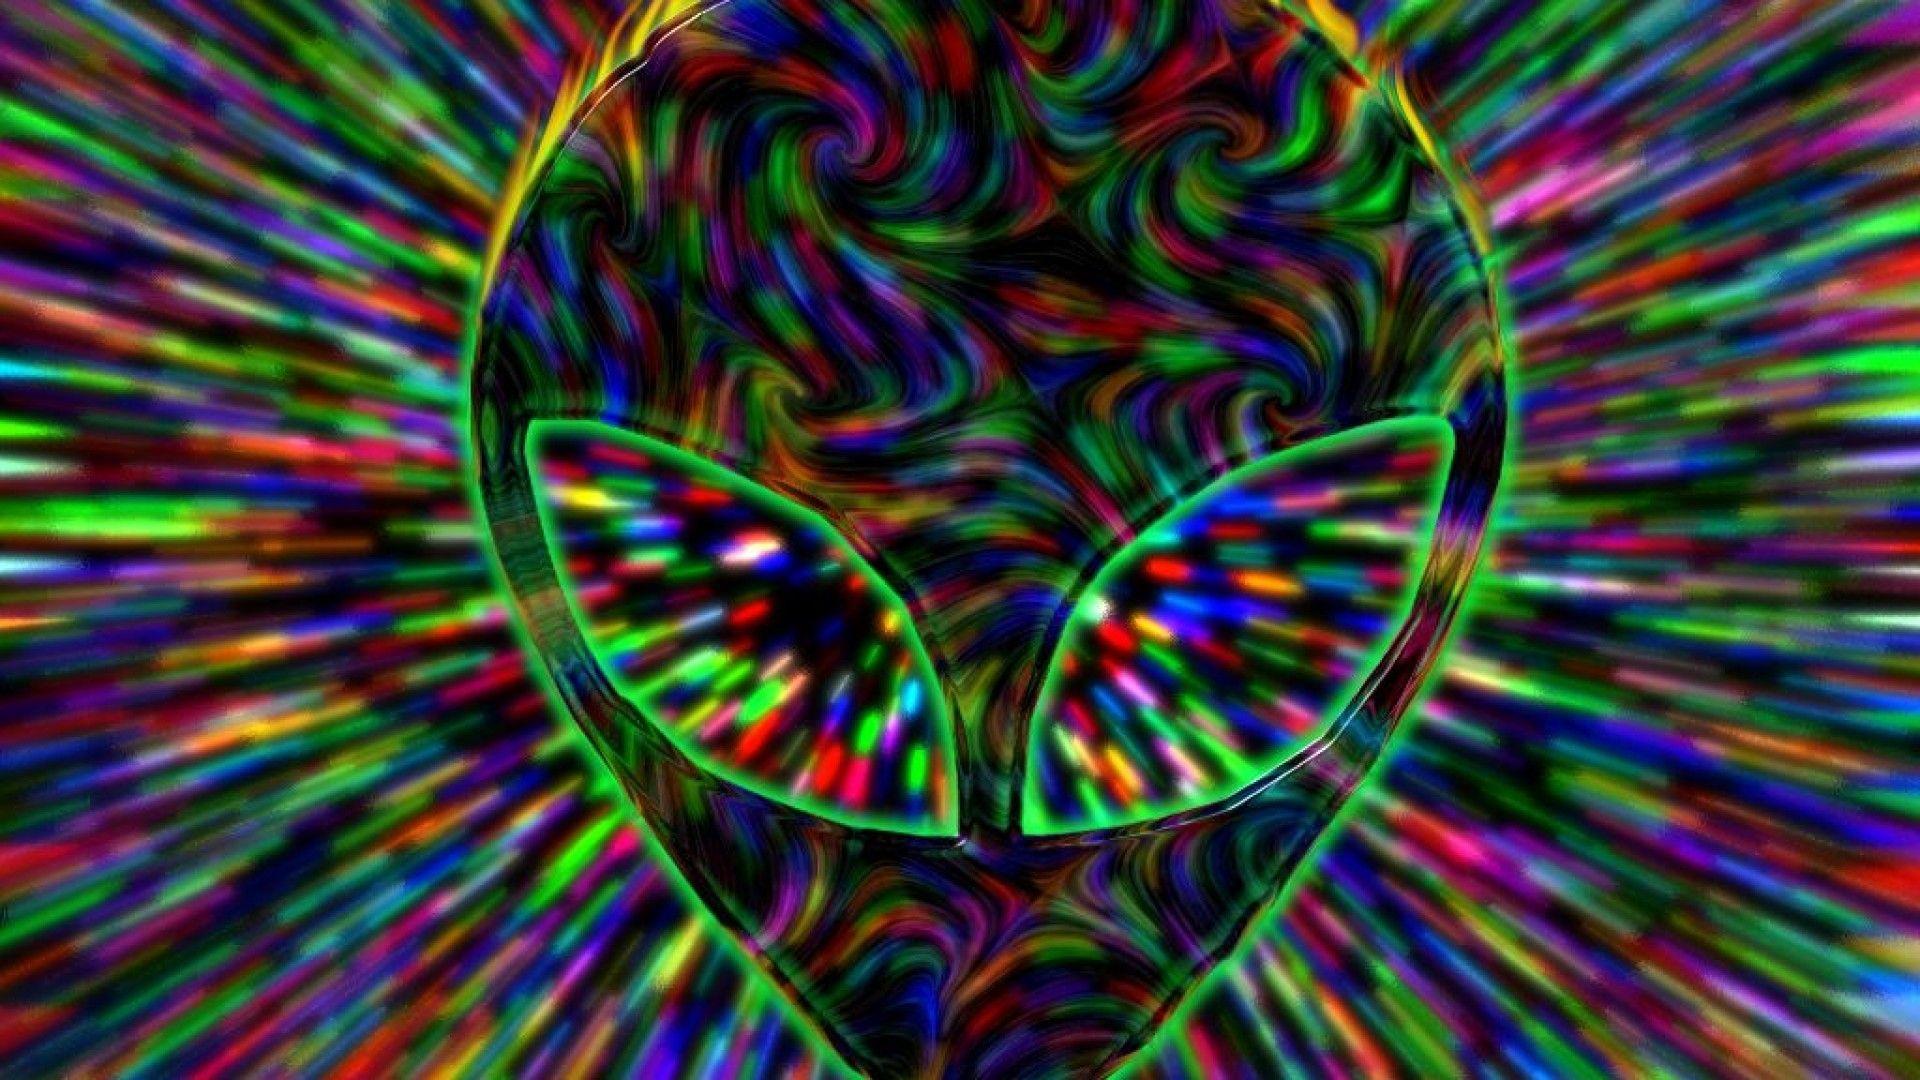 Wallpaper Trippy Weed Rainbow Alien Things To Look At High Xpx